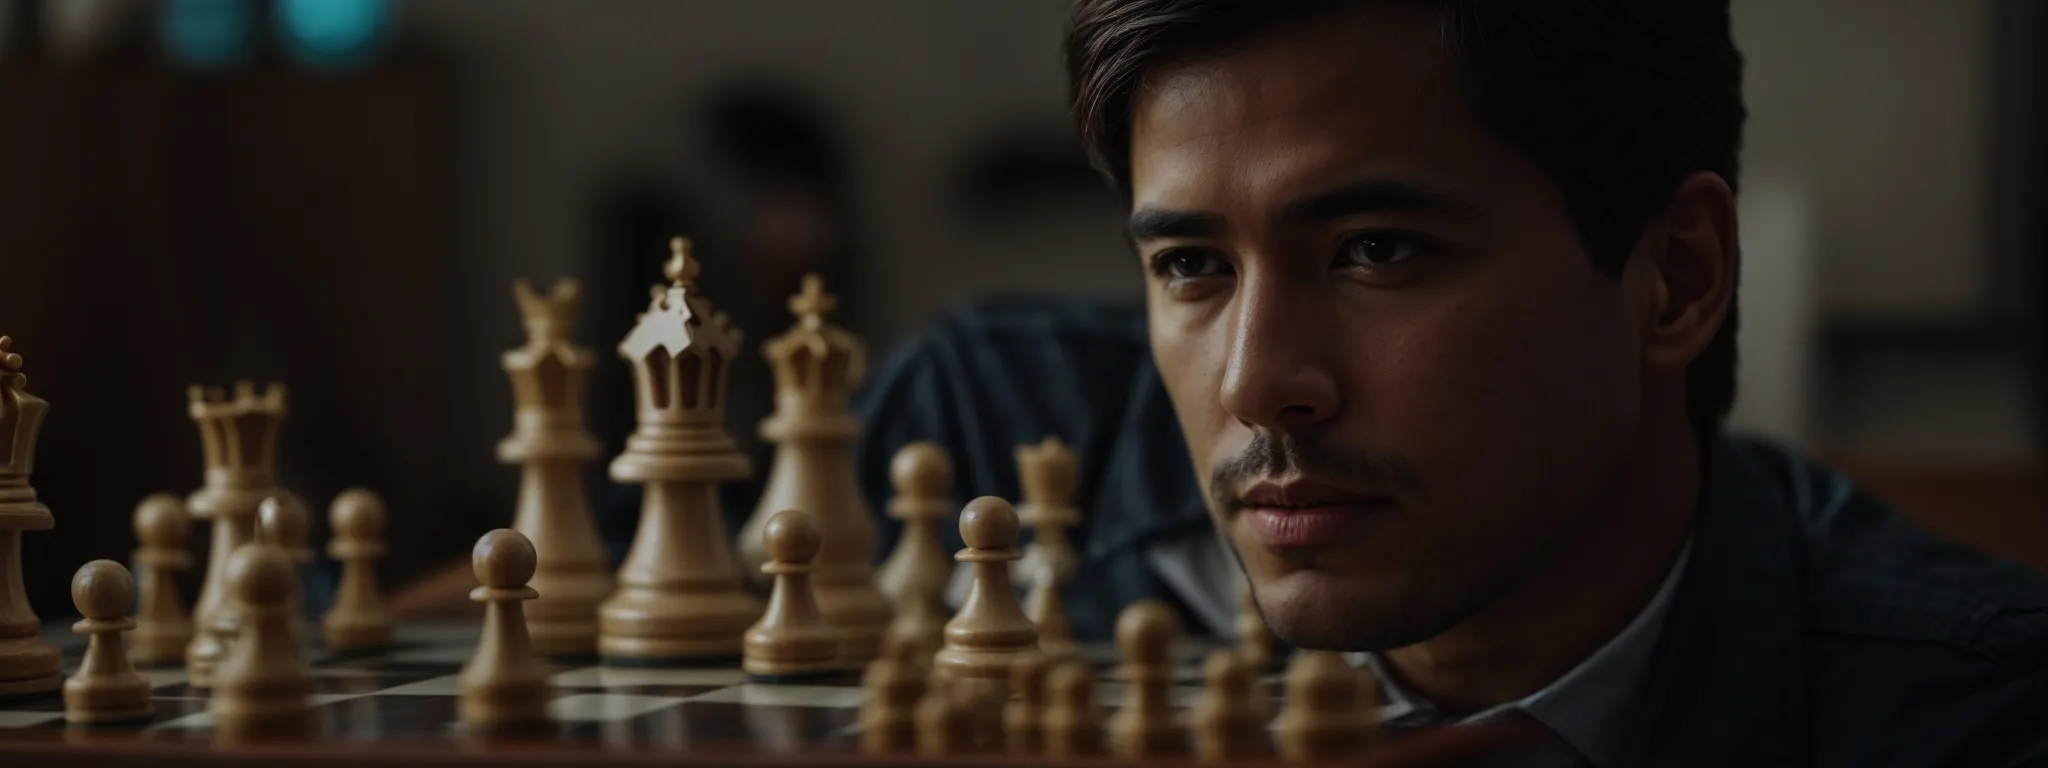 a chess player contemplates a move, symbolizing strategic planning with pieces poised for both immediate play and future victory.